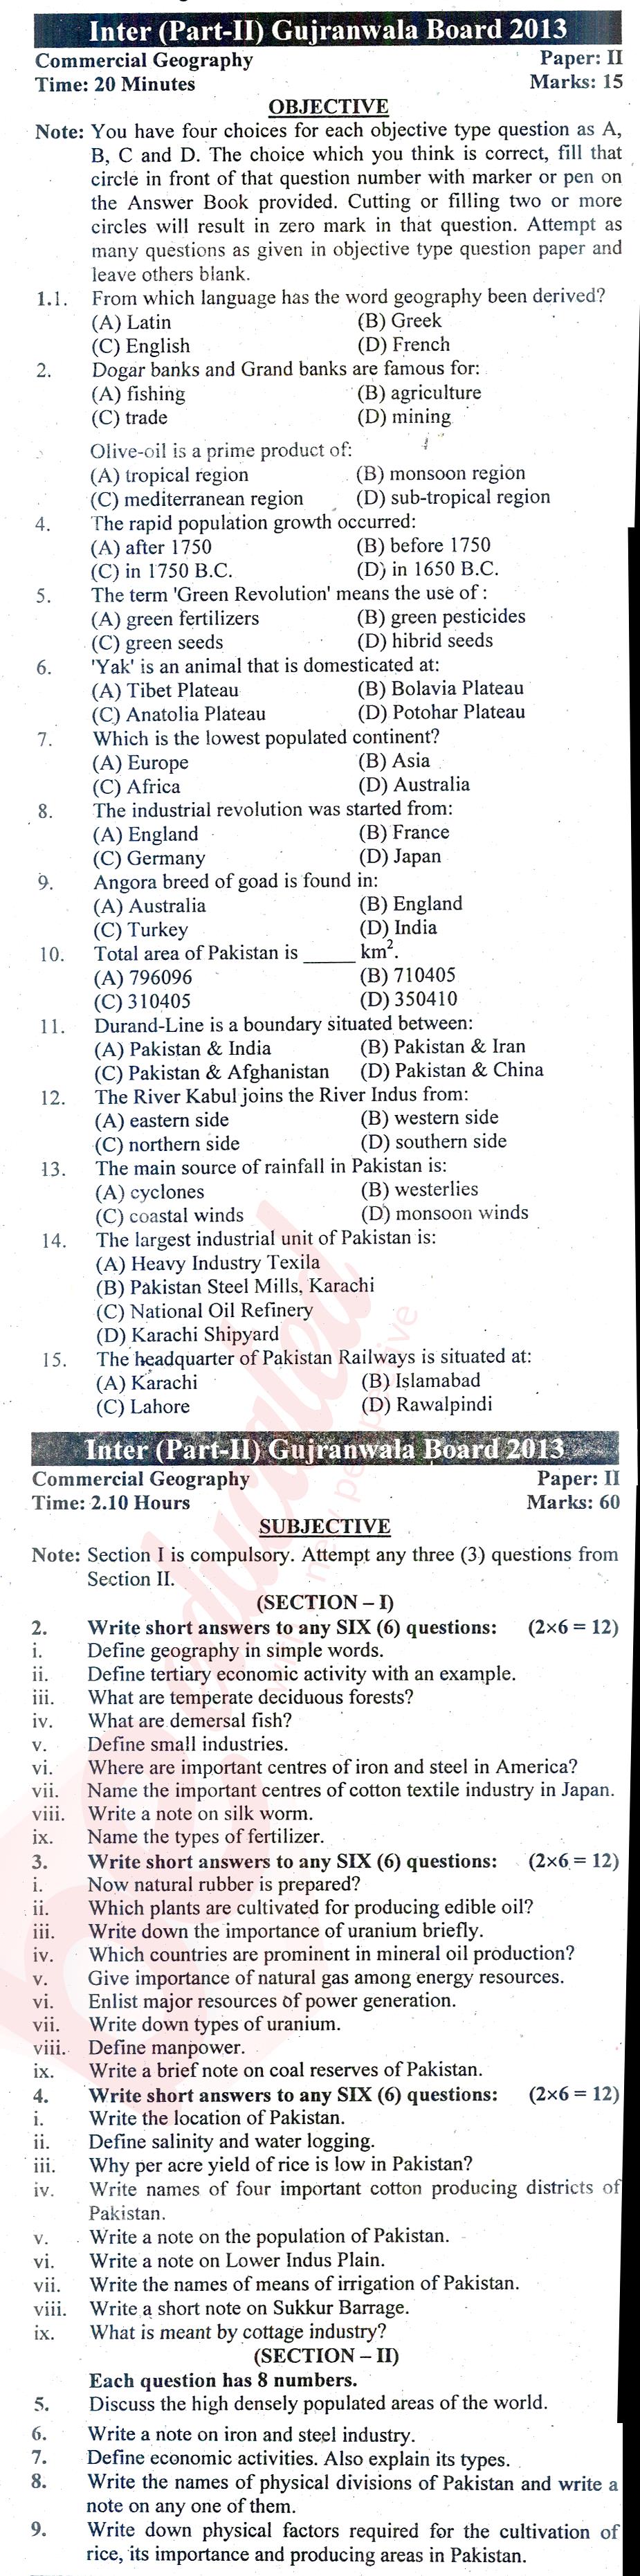 Commercial Geography ICOM Part 2 Past Paper Group 1 BISE Gujranwala 2013